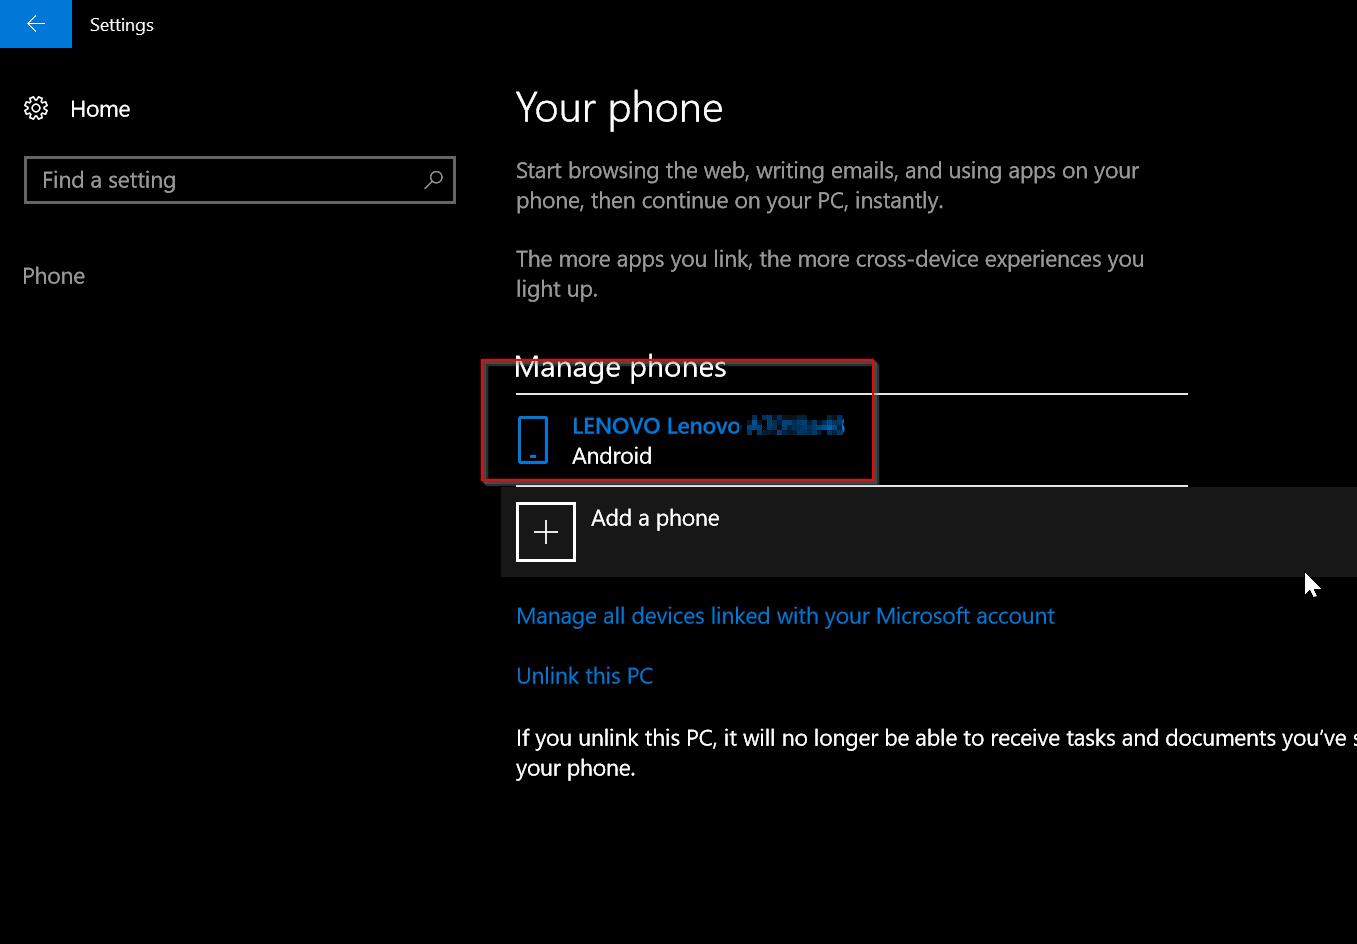 What has Changed in Windows 10 Settings of Fall Creators Update in 1709 Version?